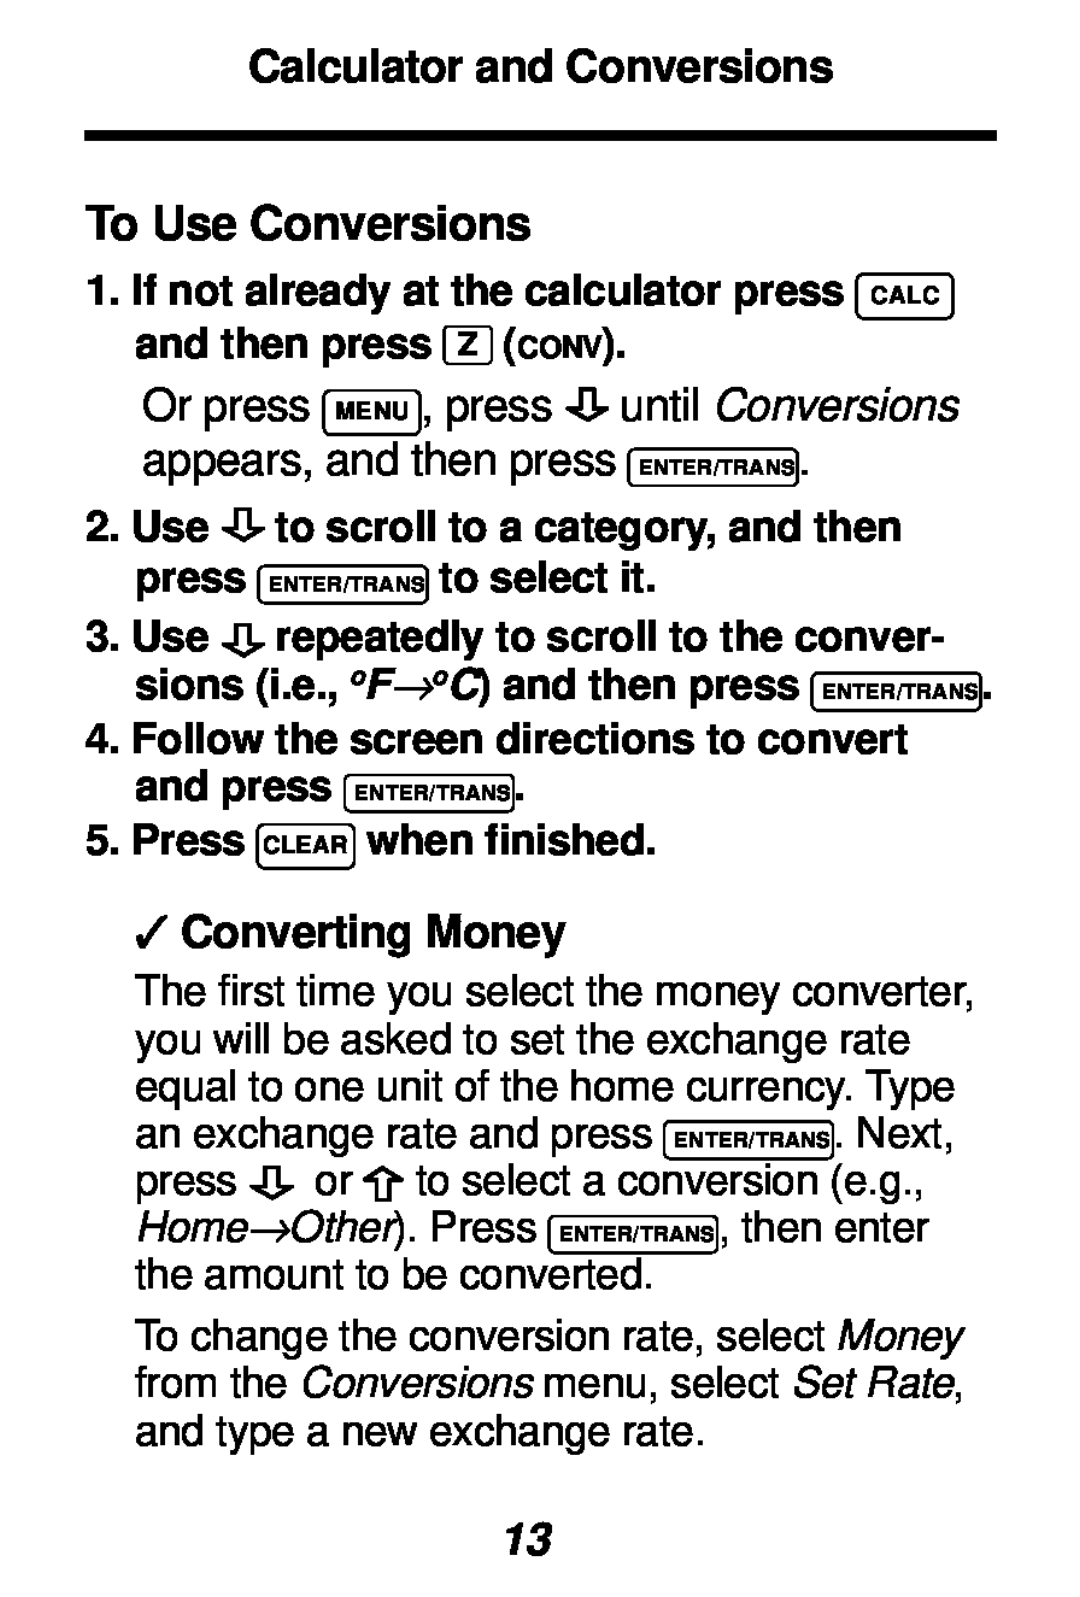 Franklin TES-106 manual To Use Conversions, Calculator and Conversions, Converting Money 